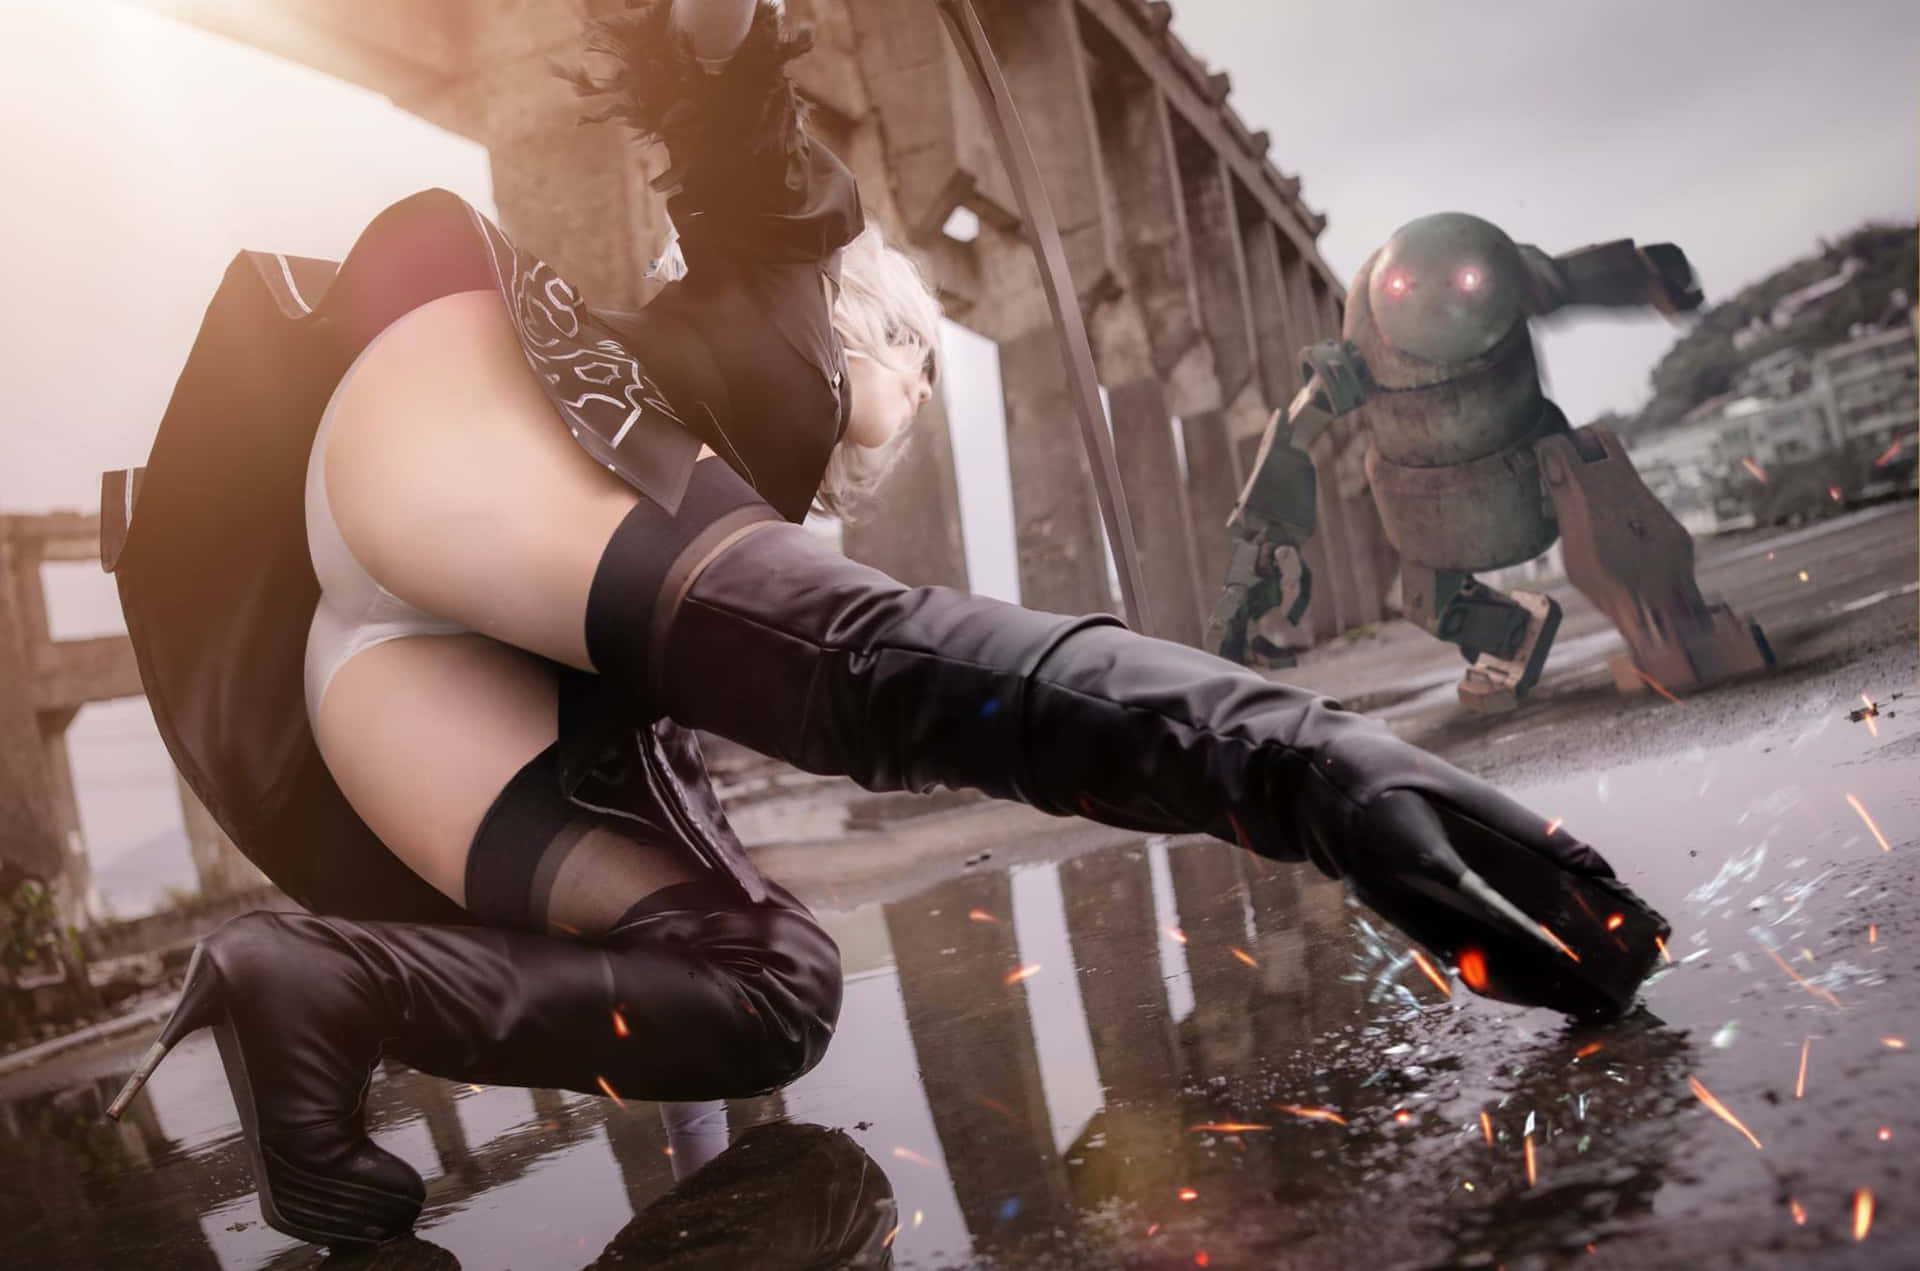 Hd android wallpapers 1080p sexy cosplay